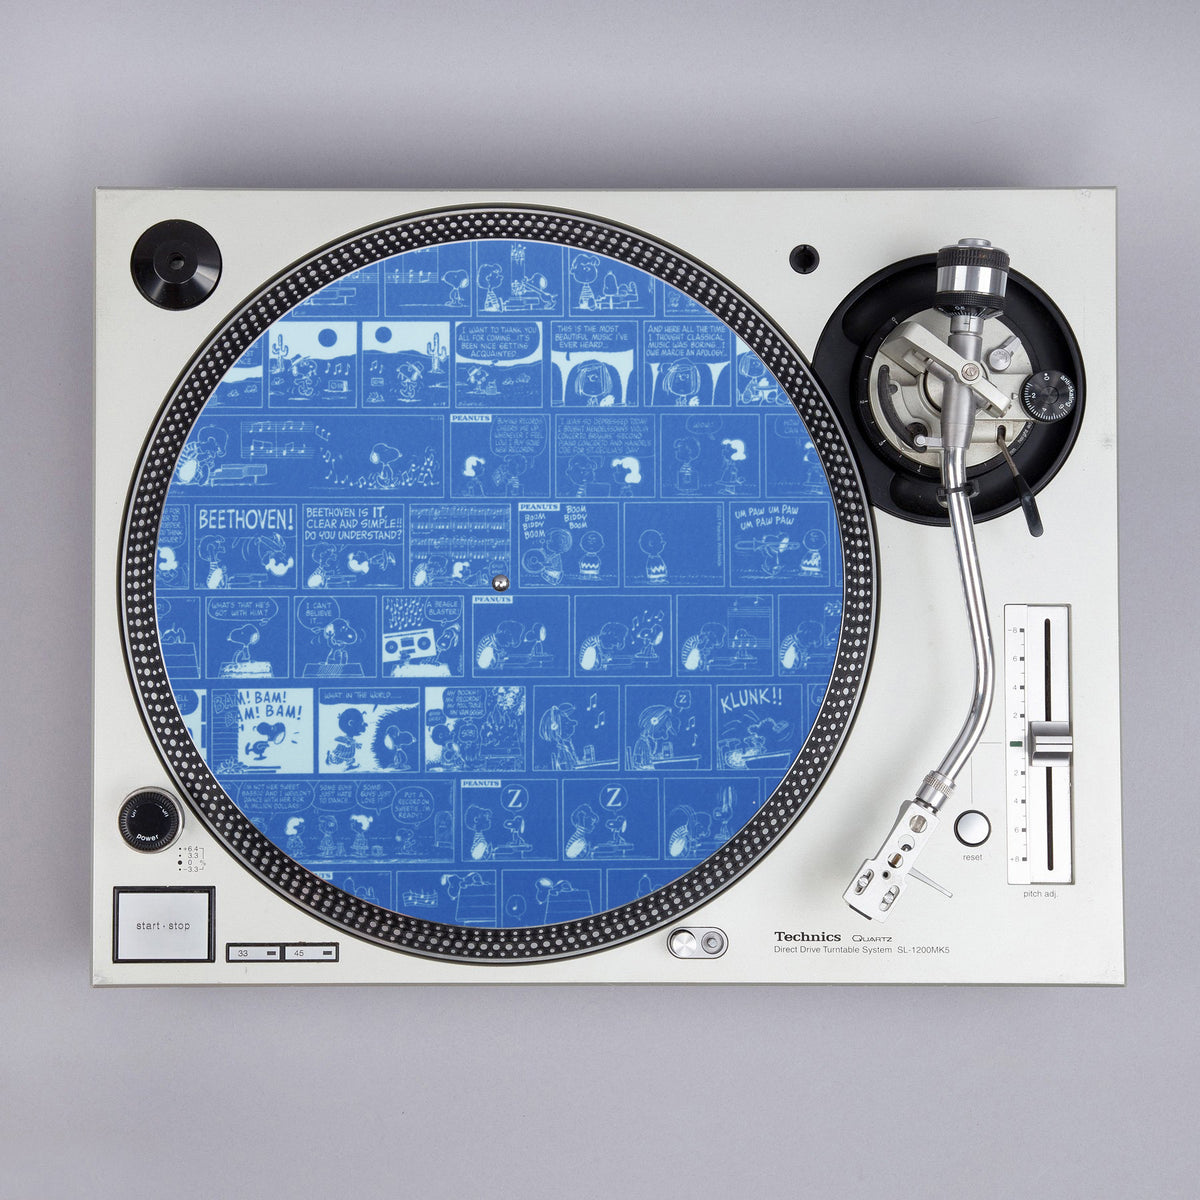 Vinyl 101: What is a Slipmat? Do You Need One?